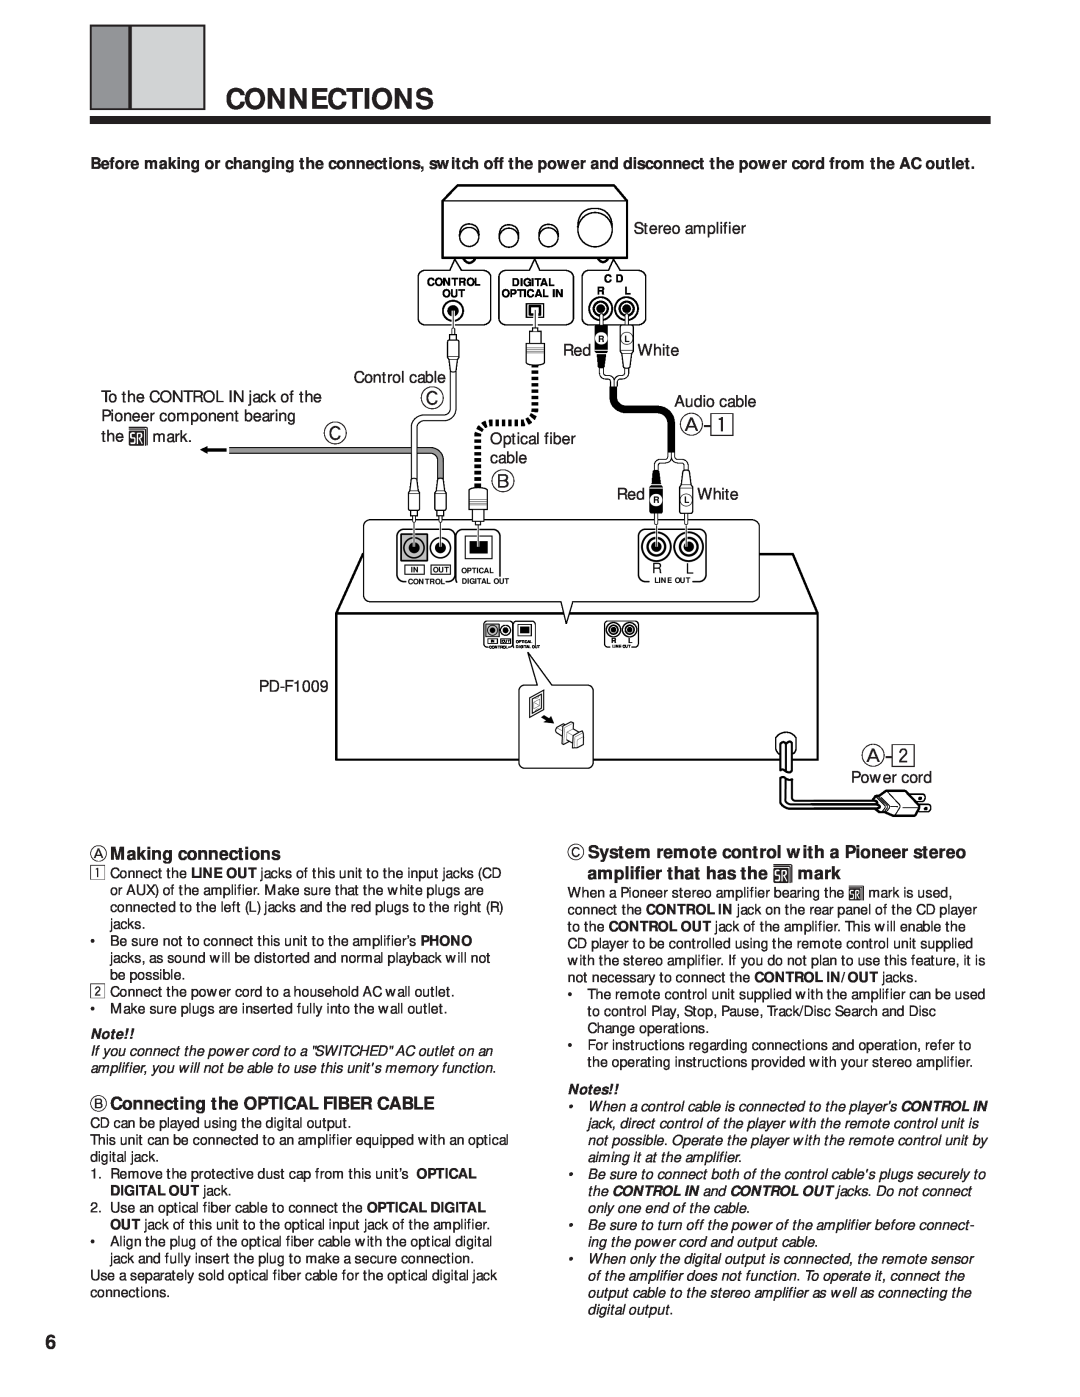 Pioneer PD-F1009 manual Connections 